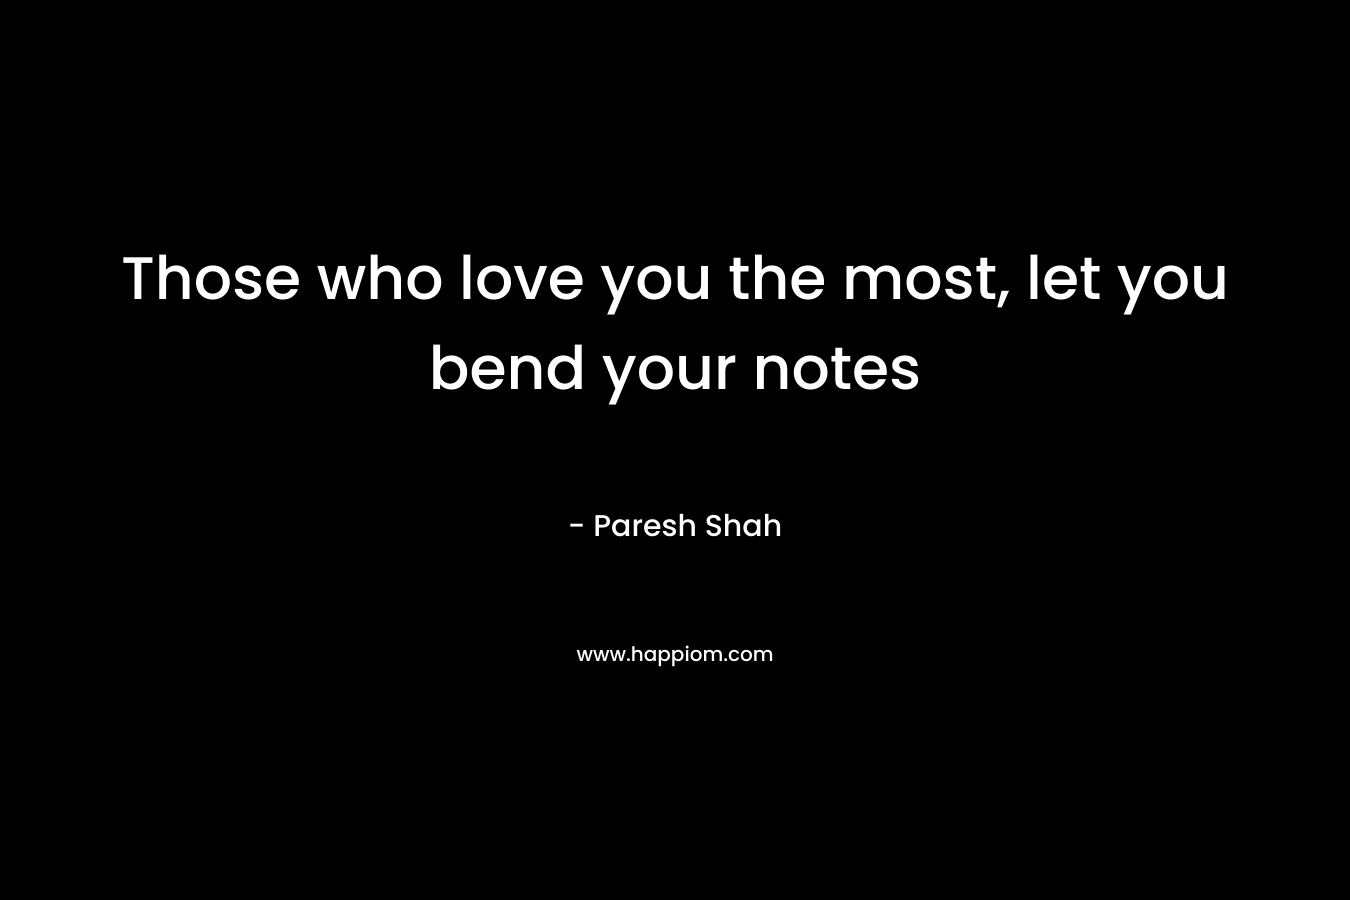 Those who love you the most, let you bend your notes